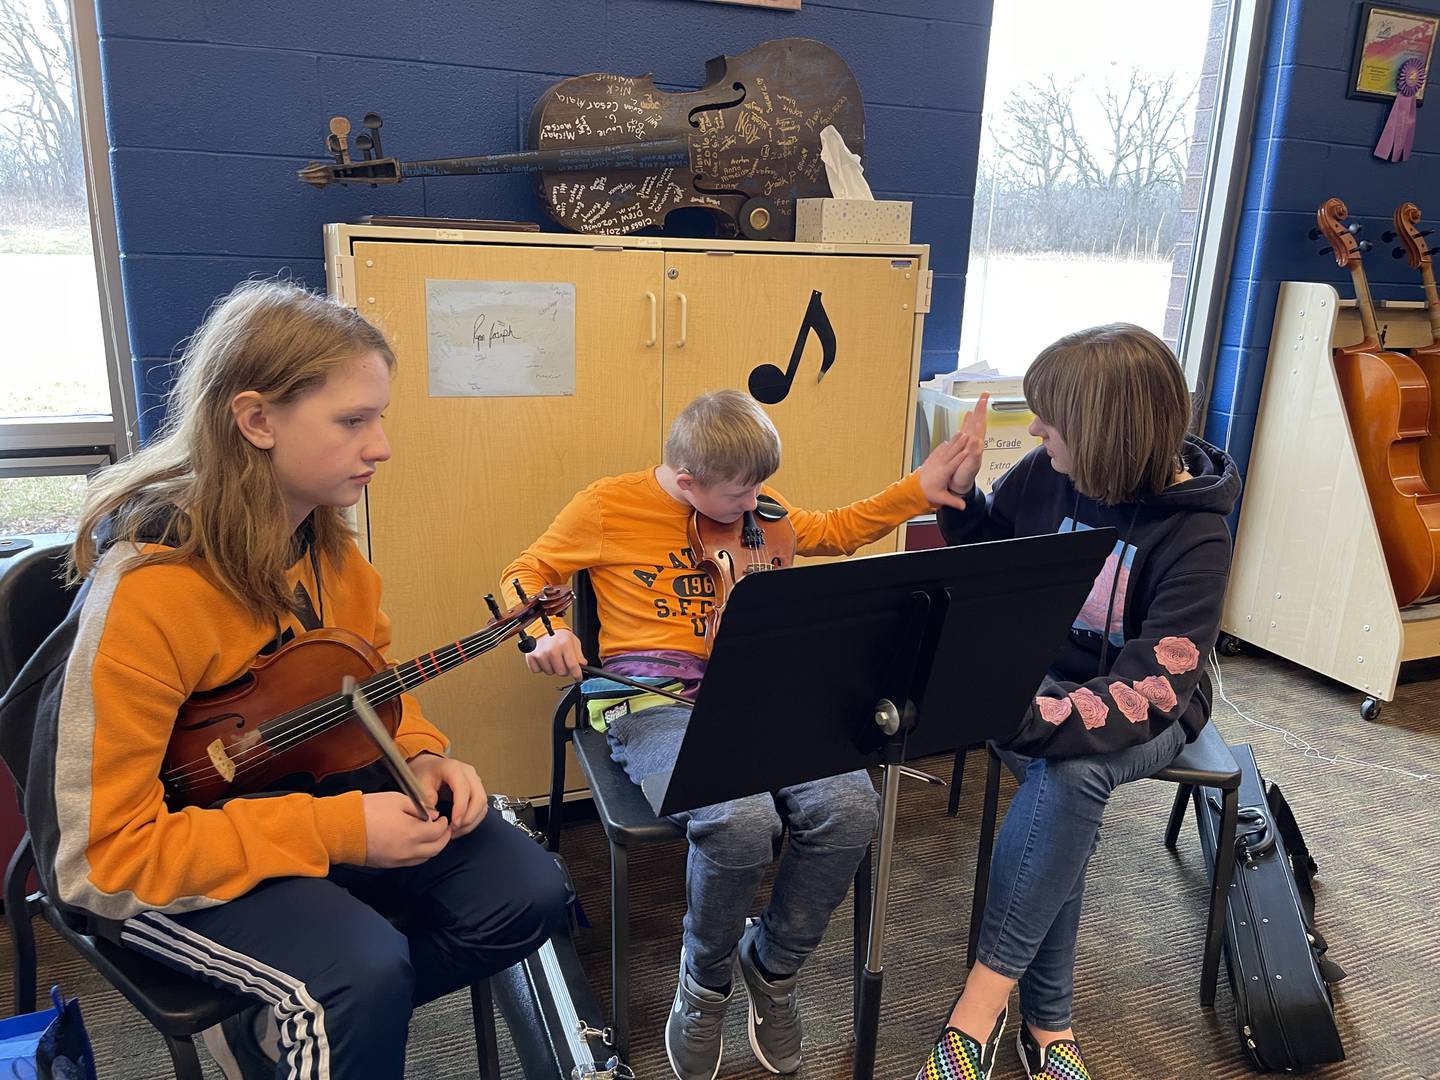 From left to right, Lucas Balgeman, Luca Slabinski and Mackenzie Green practice music on Friday, Jan. 13, 2023, at Creekside Middle School, as part of the United Sound program. United Sound is geared toward removing social barriers through music. At Creekside, it provides students in special education the opportunity to learn how to play while receiving social interaction.